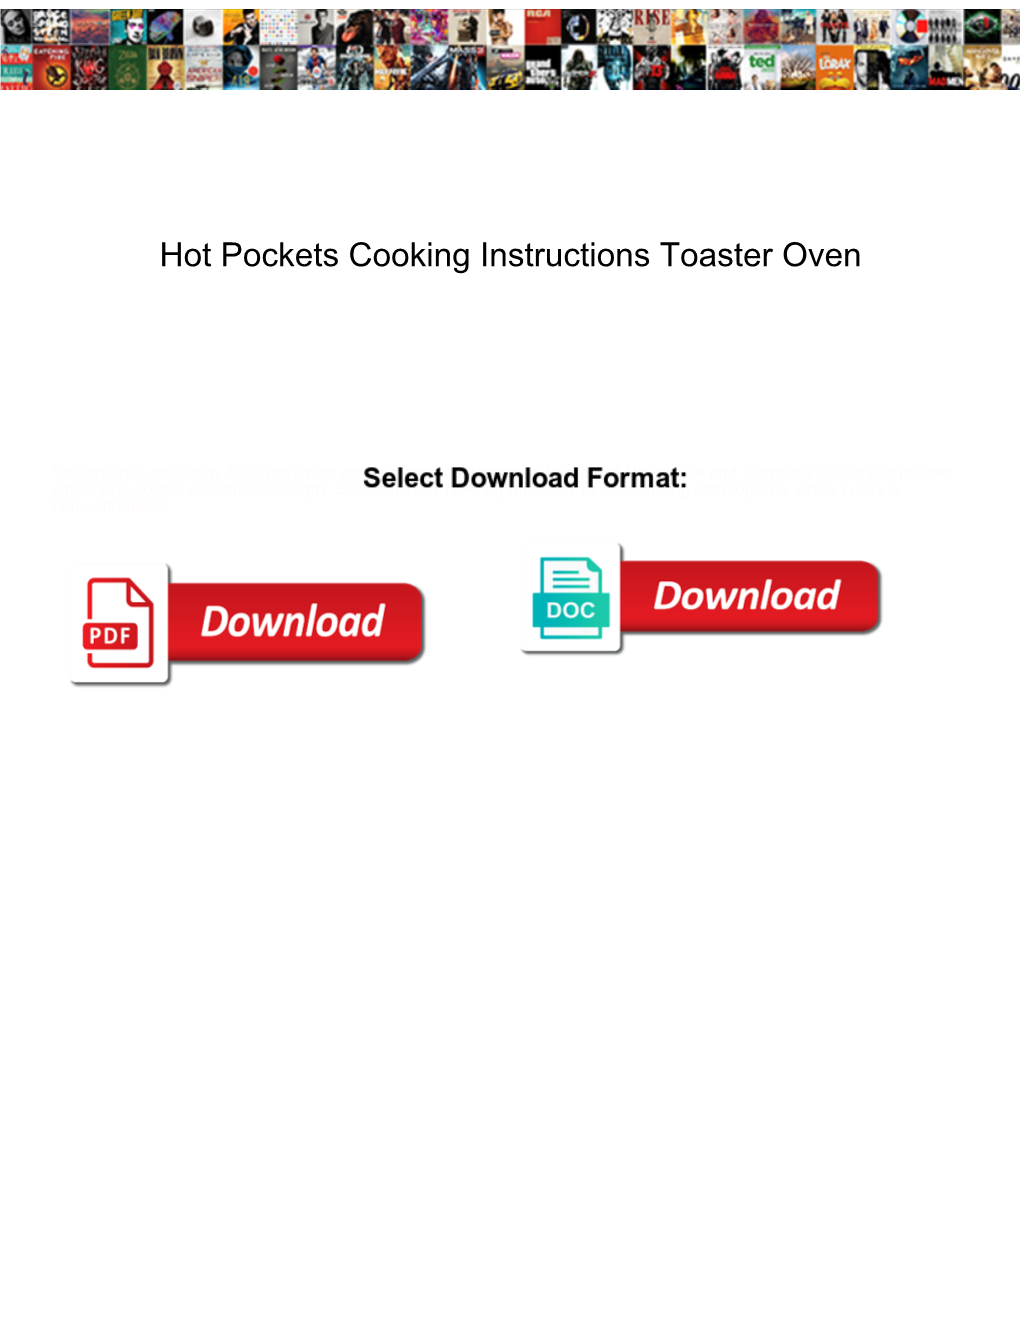 Hot Pockets Cooking Instructions Toaster Oven